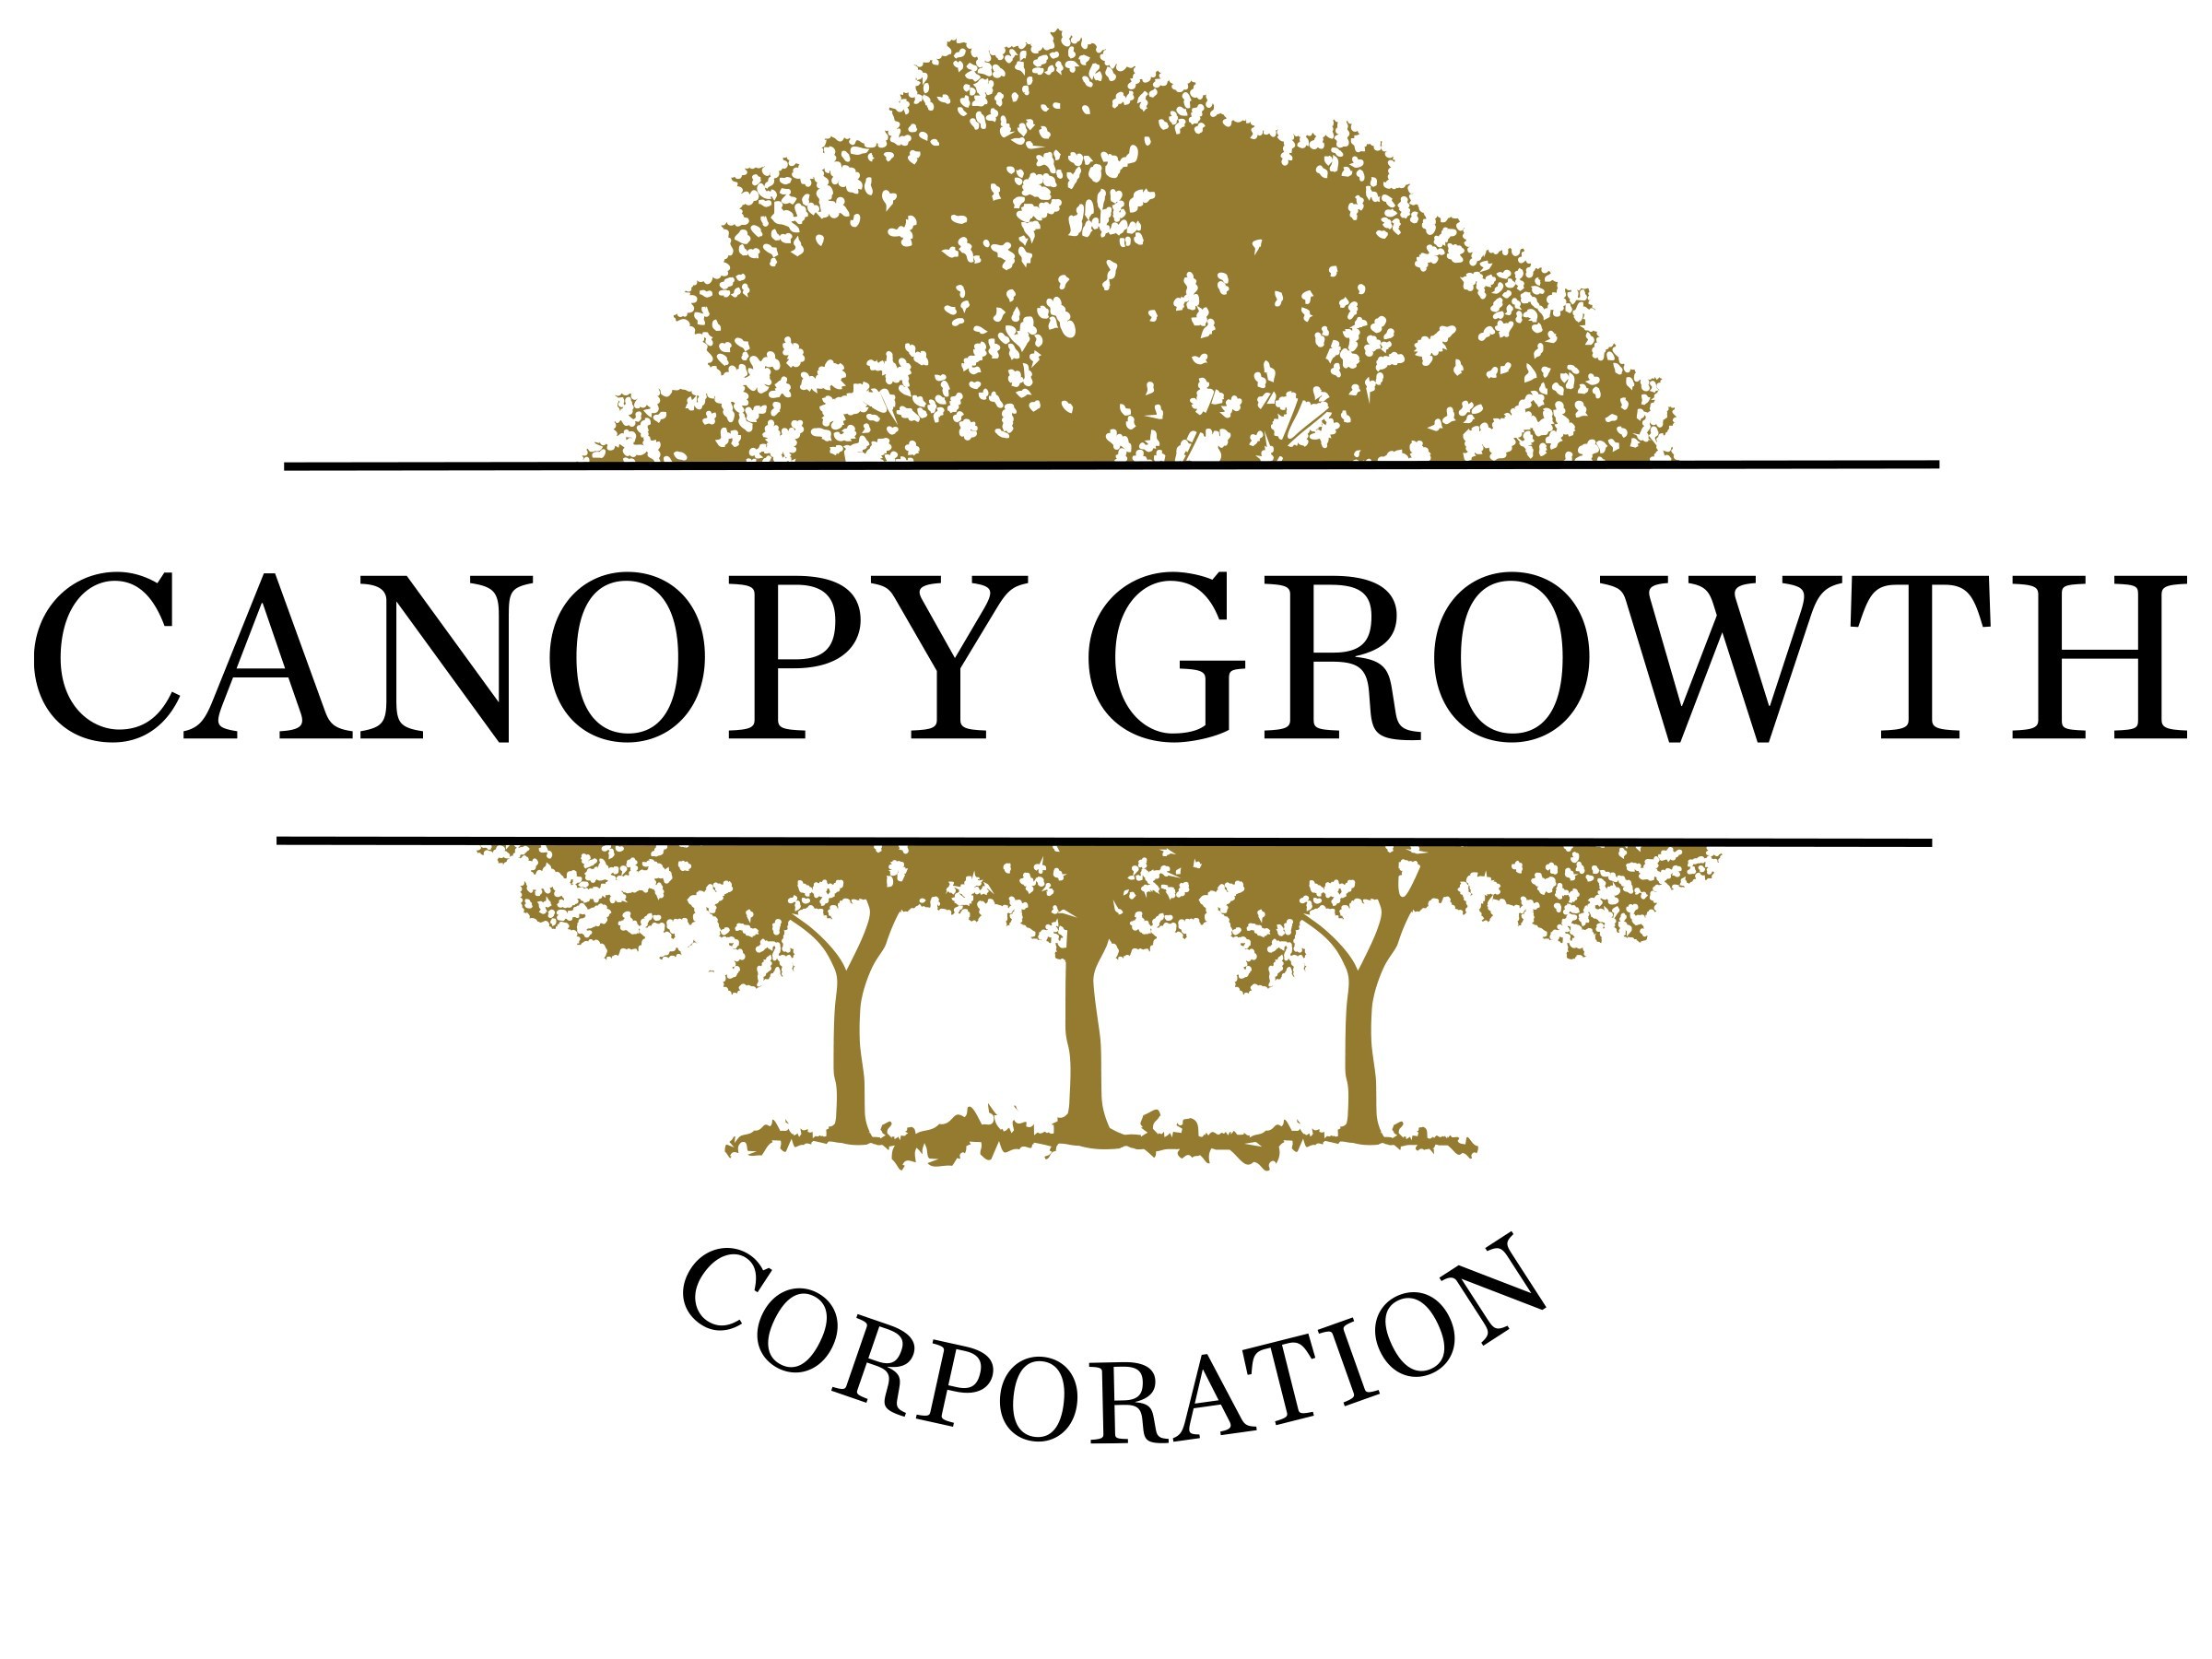 Canopy Growth Announces Exchanges with Holders of Approximately US$198 Million of Convertible Notes (CNW Group/Canopy Growth Corporation)